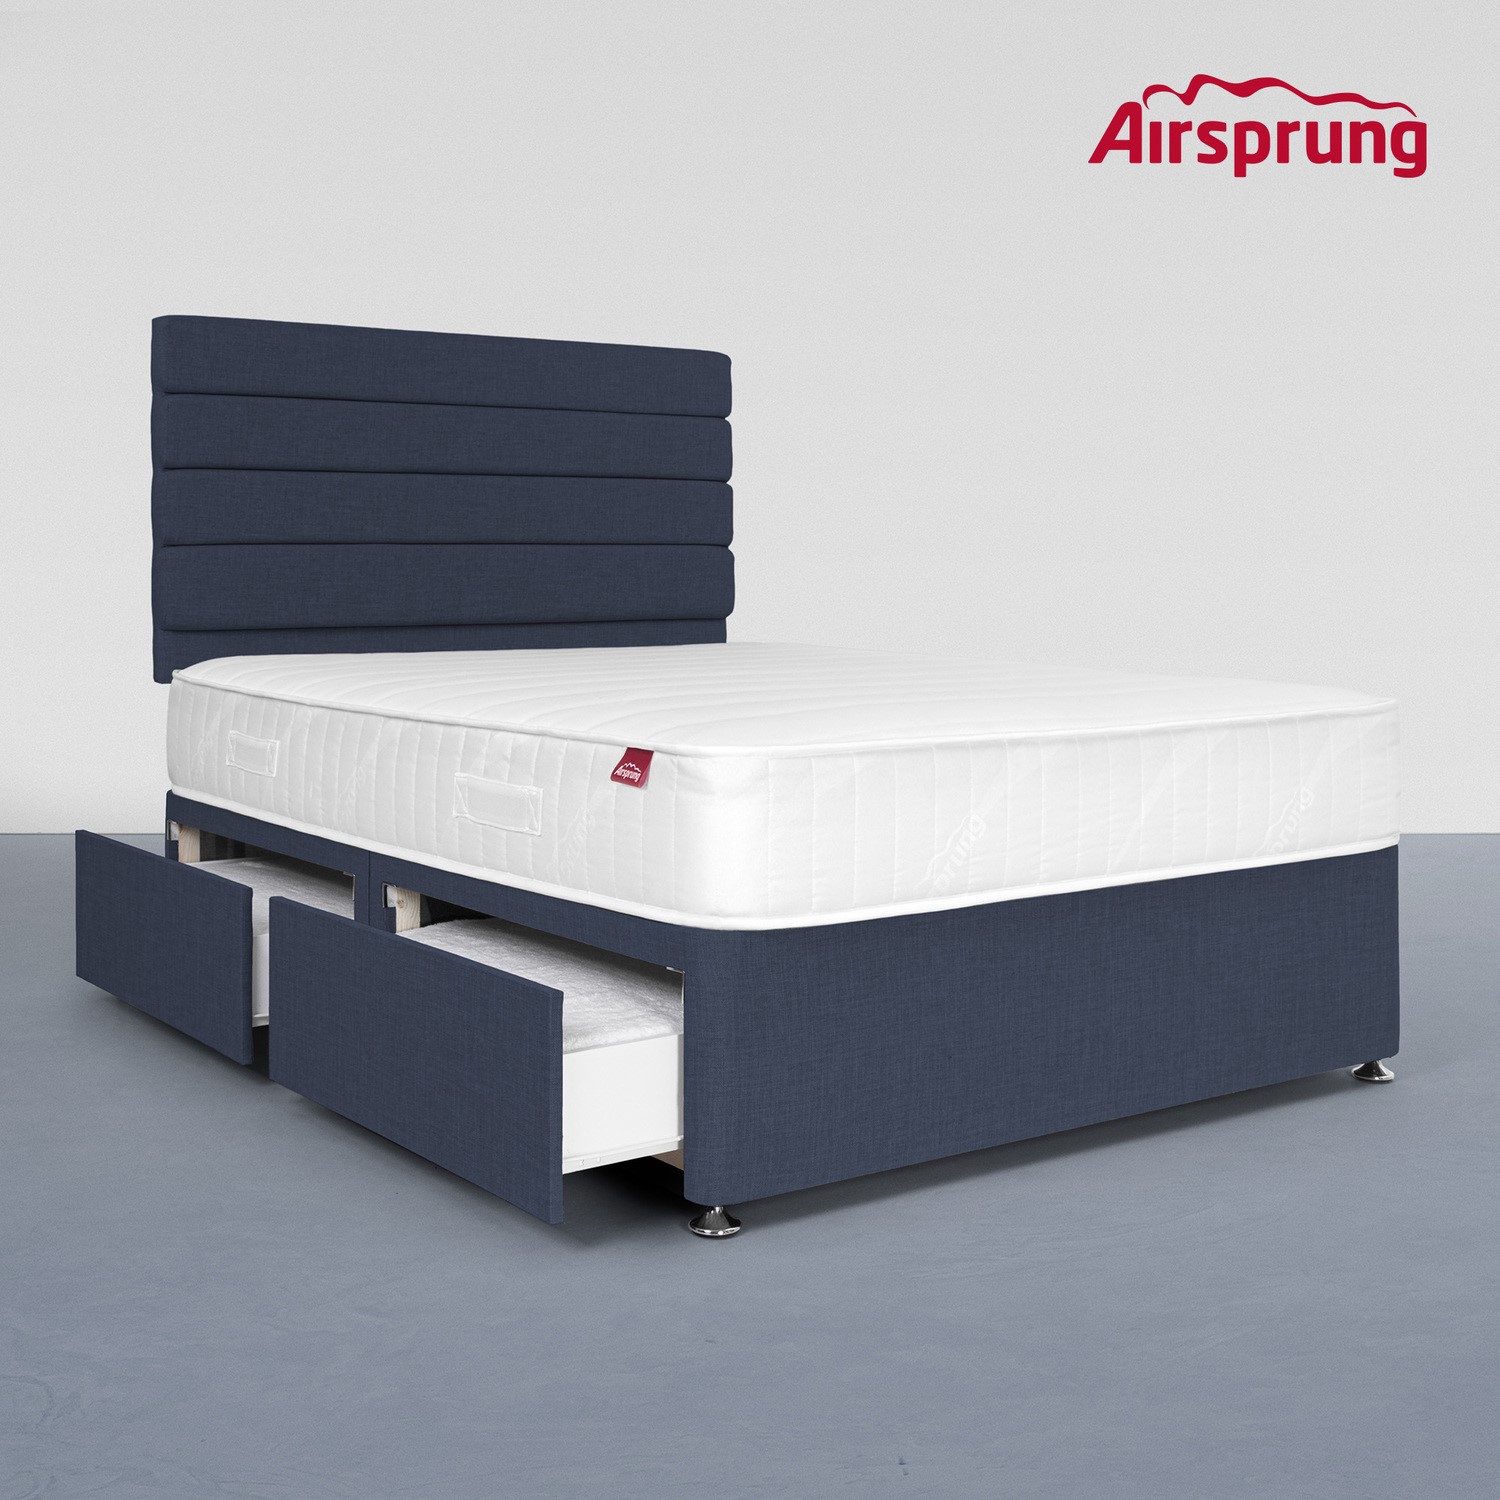 Read more about Airsprung double 4 drawer divan bed with hybrid mattress midnight blue